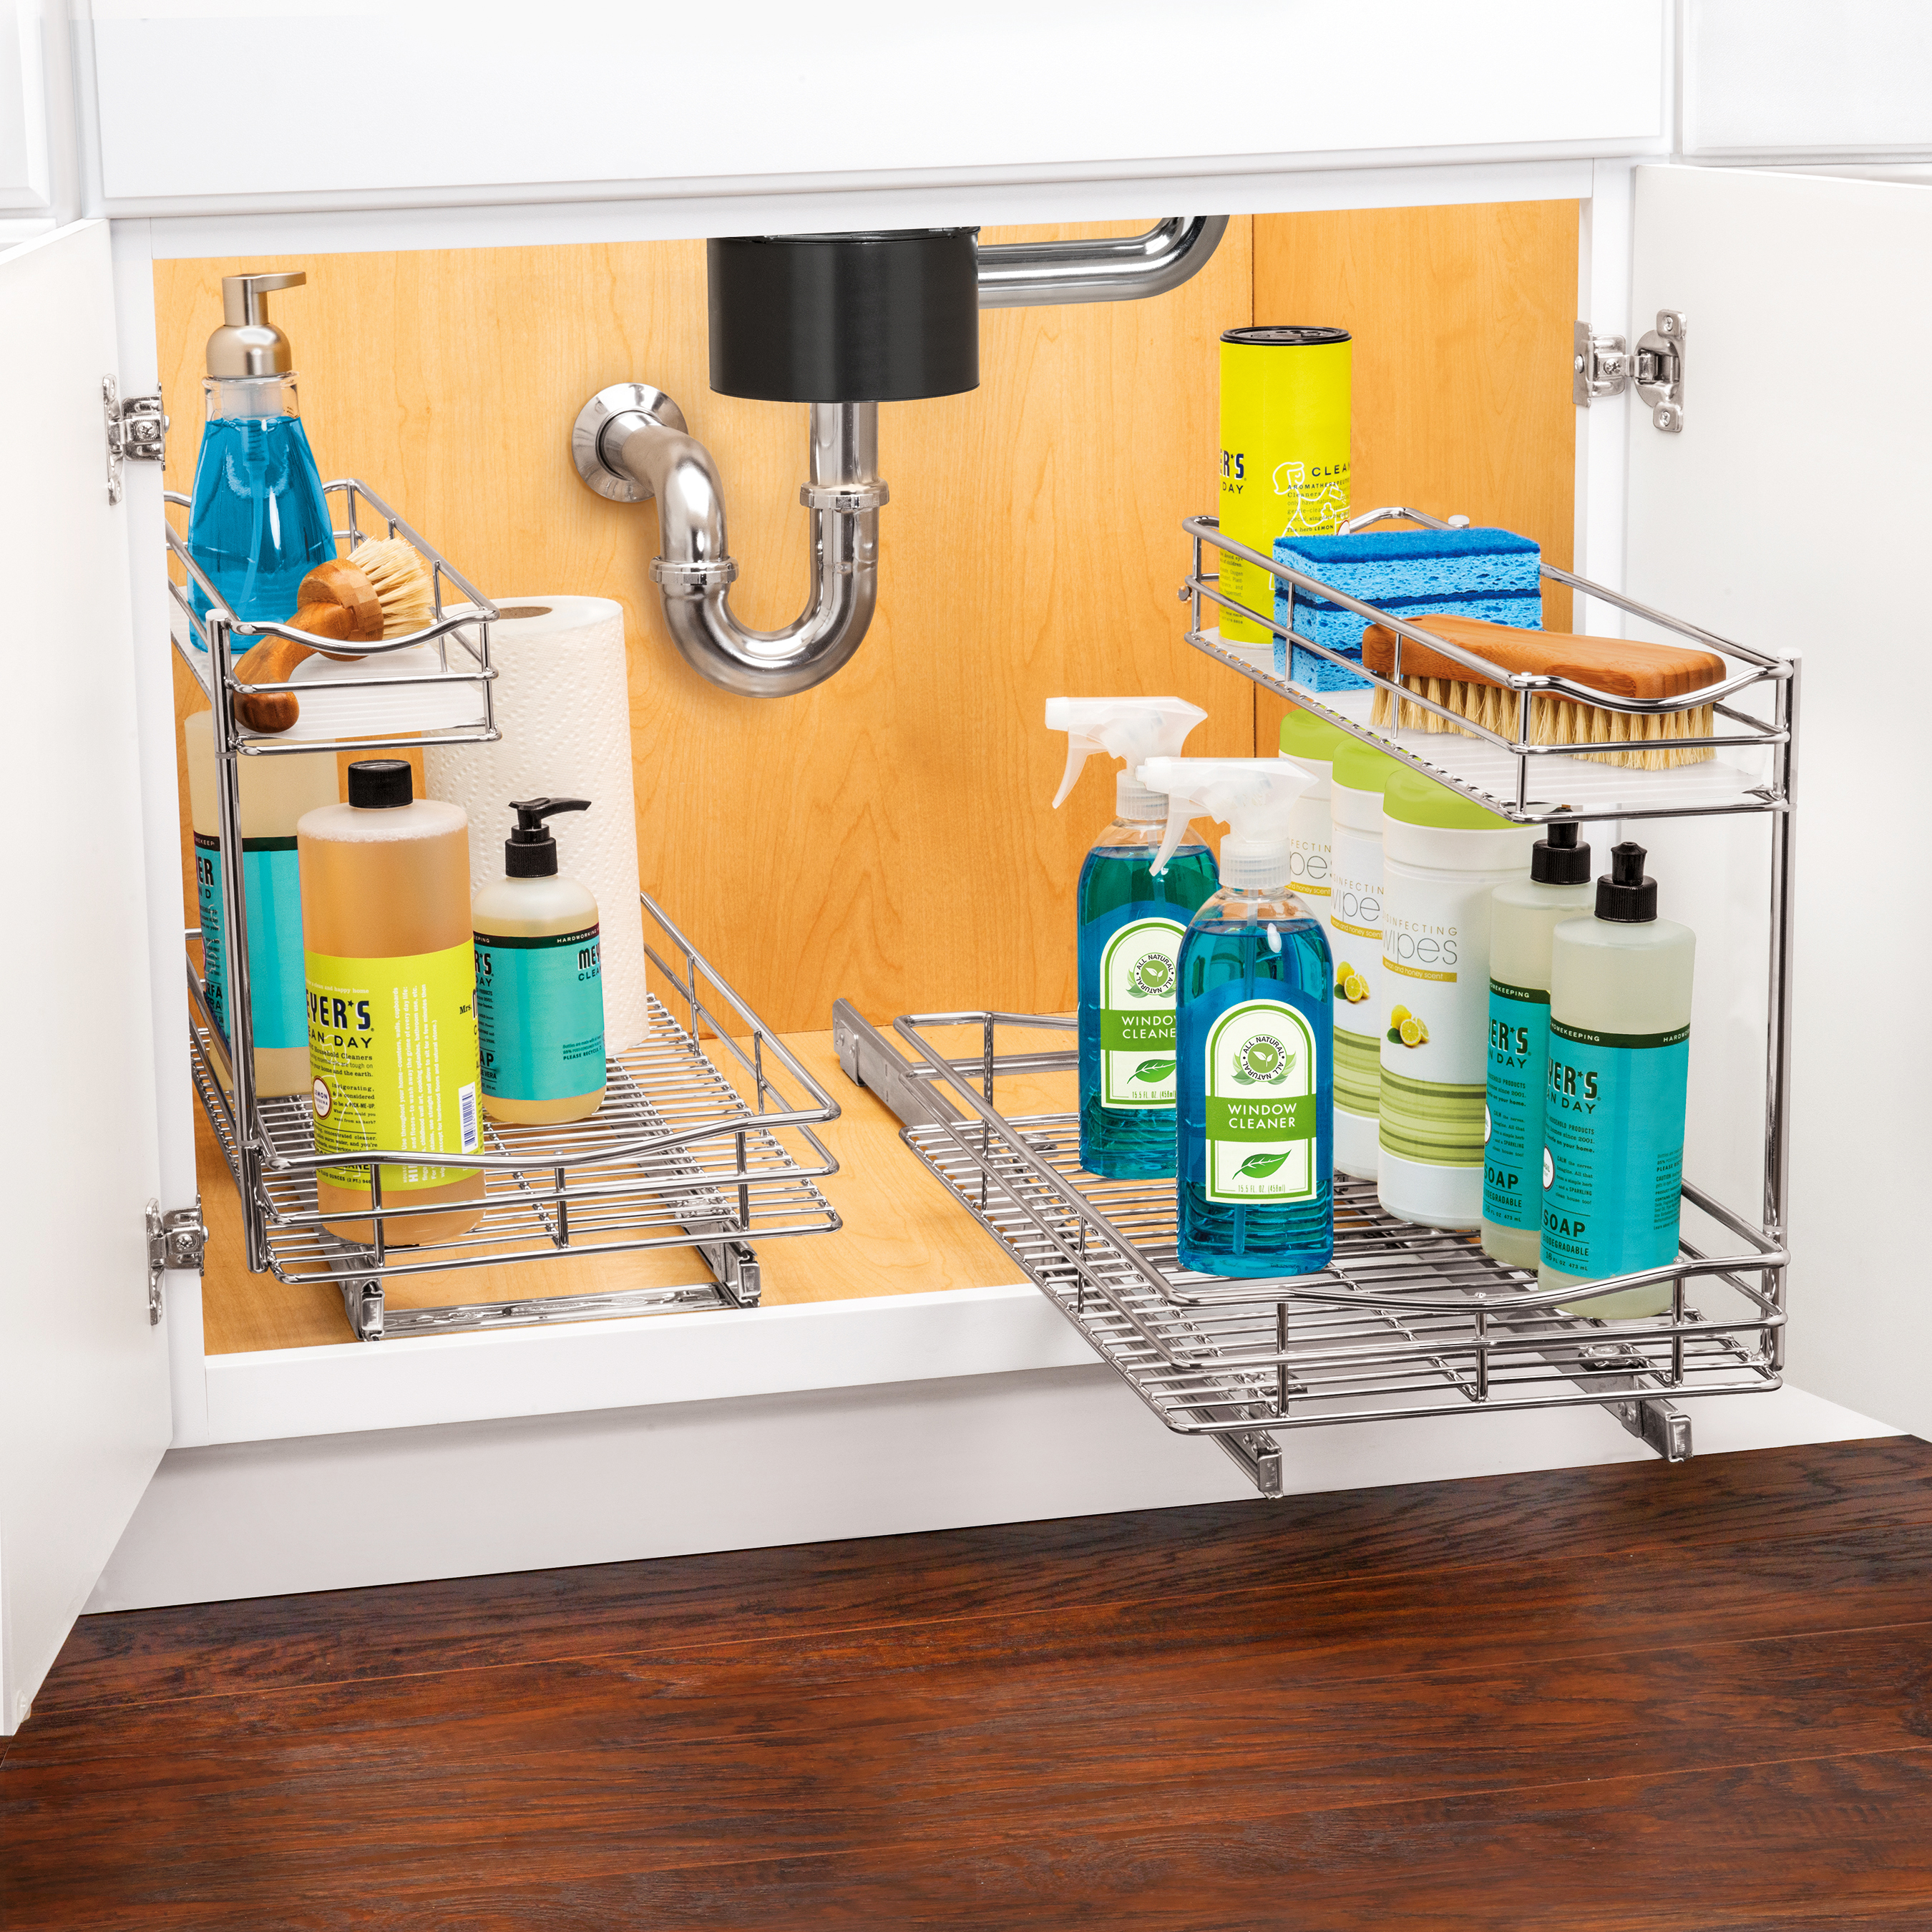 https://www.lynkinc.com/wp-content/uploads/2018/01/Lynk-451118DS_3-PROFESSIONAL-Roll-Out-Under-Sink-Organizer-11.5in-x-18in.jpg